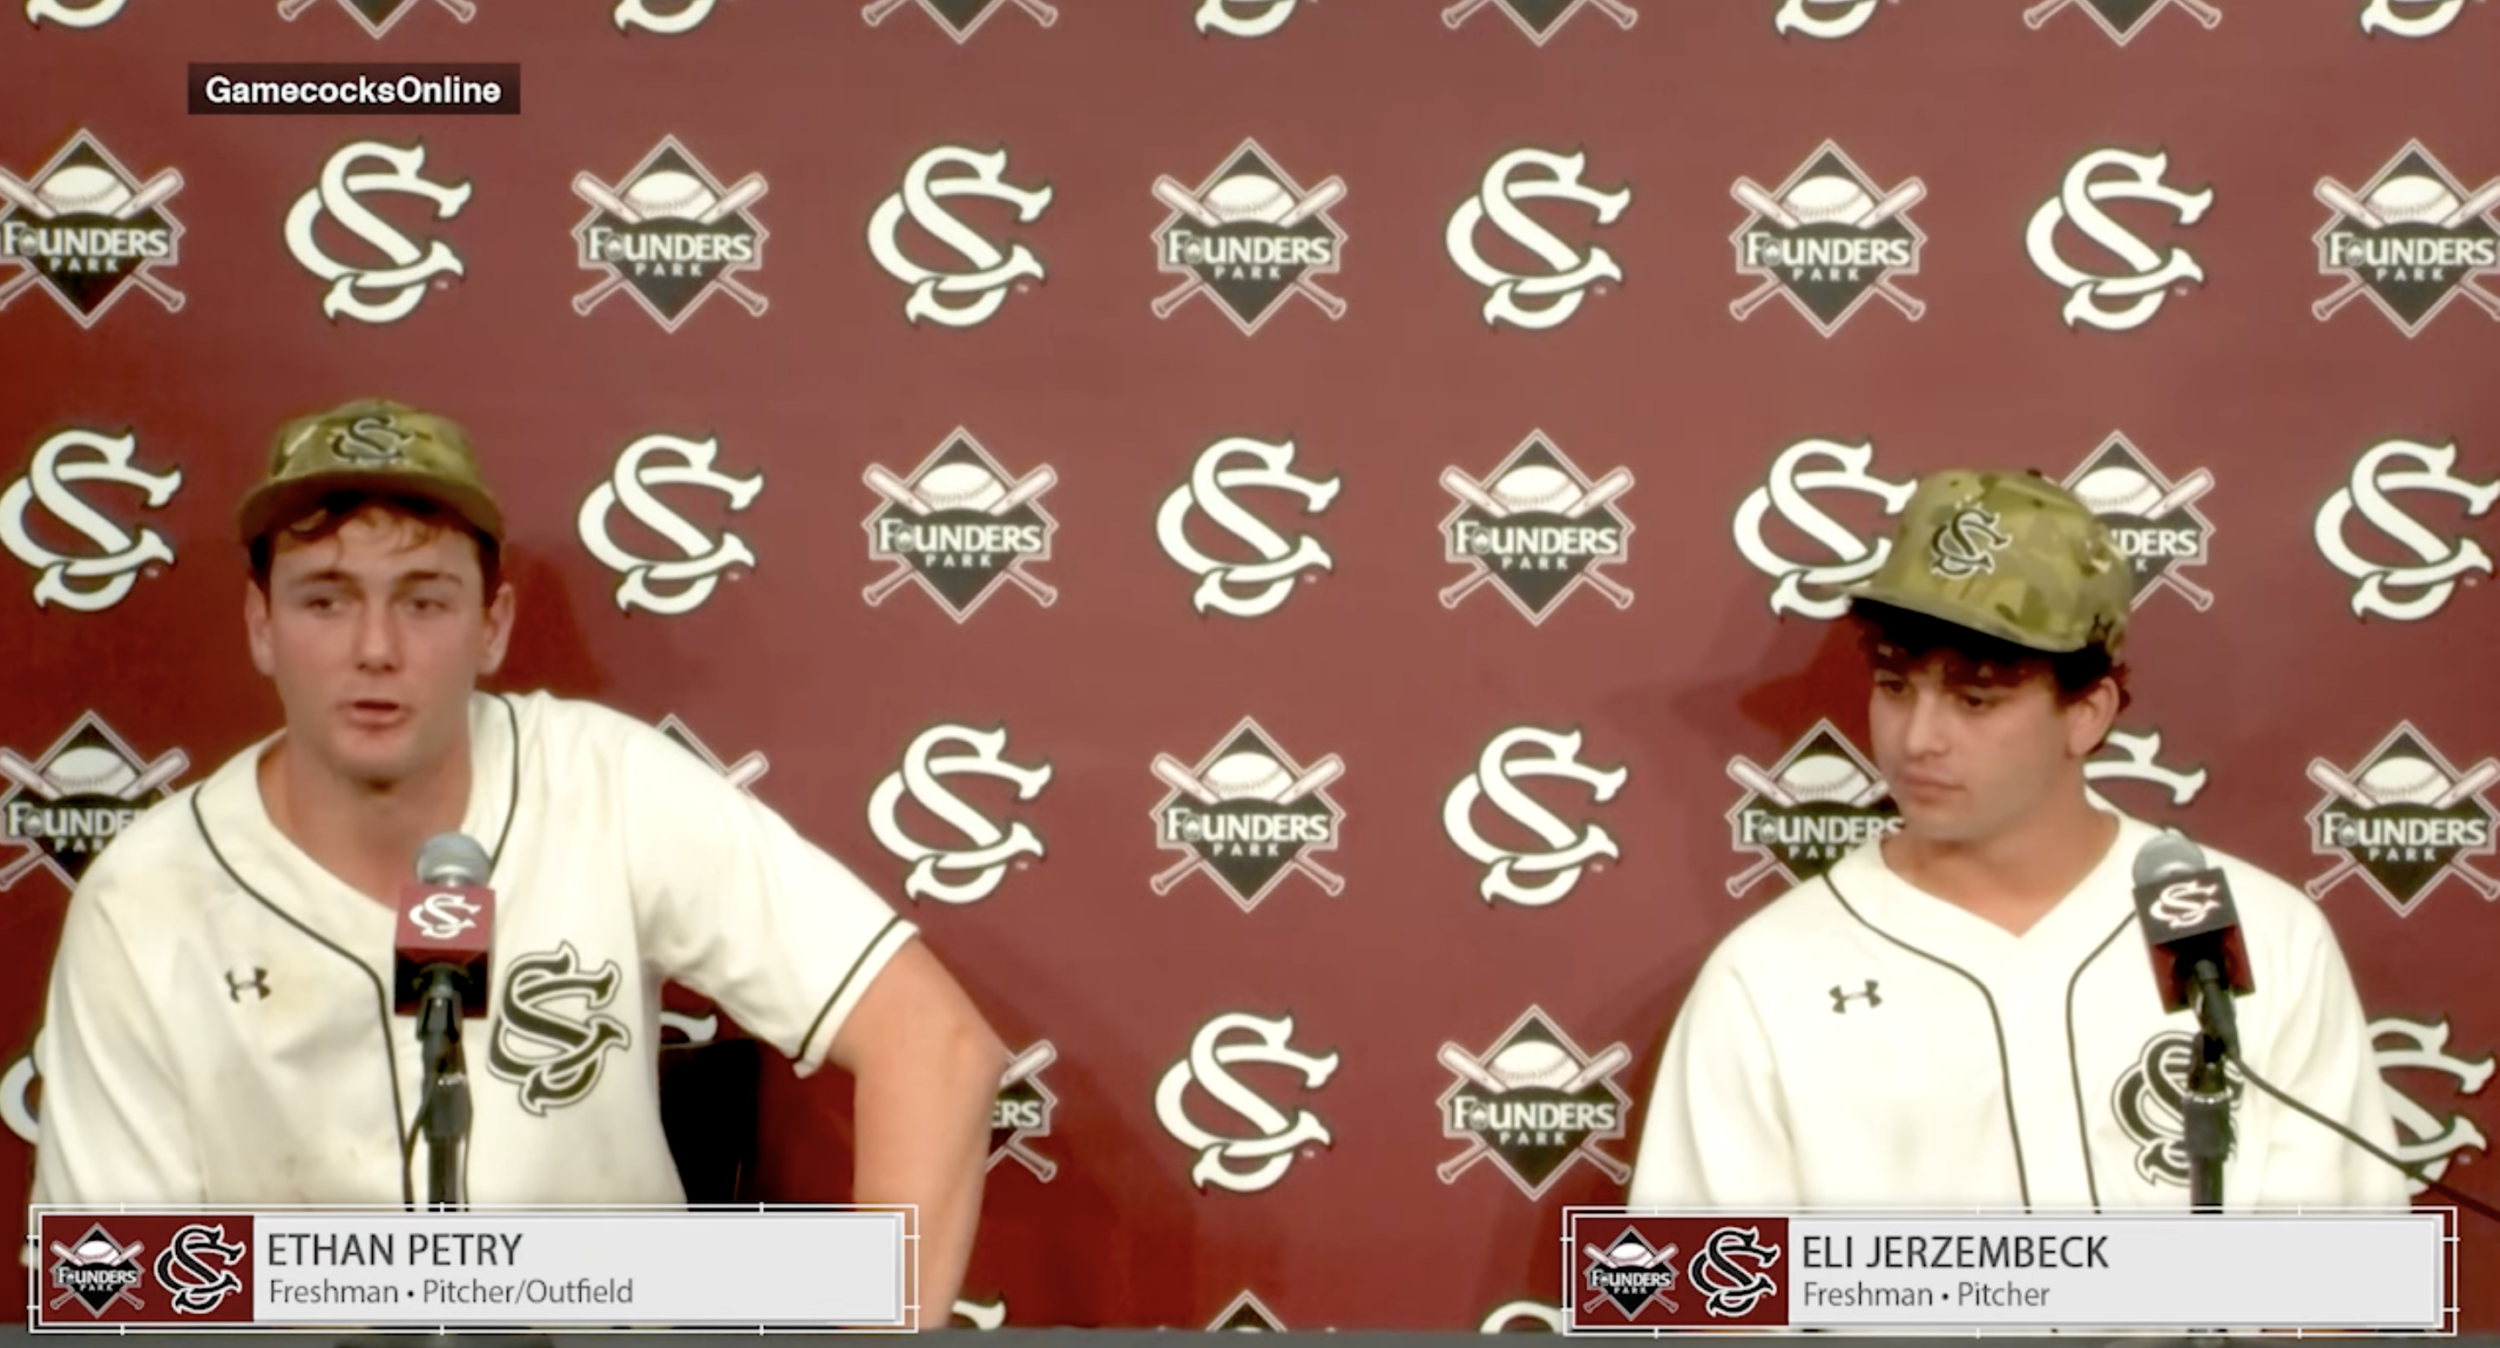 PostGame News Conference: (Winthrop) - Ethan Petry and Eli Jerzembeck